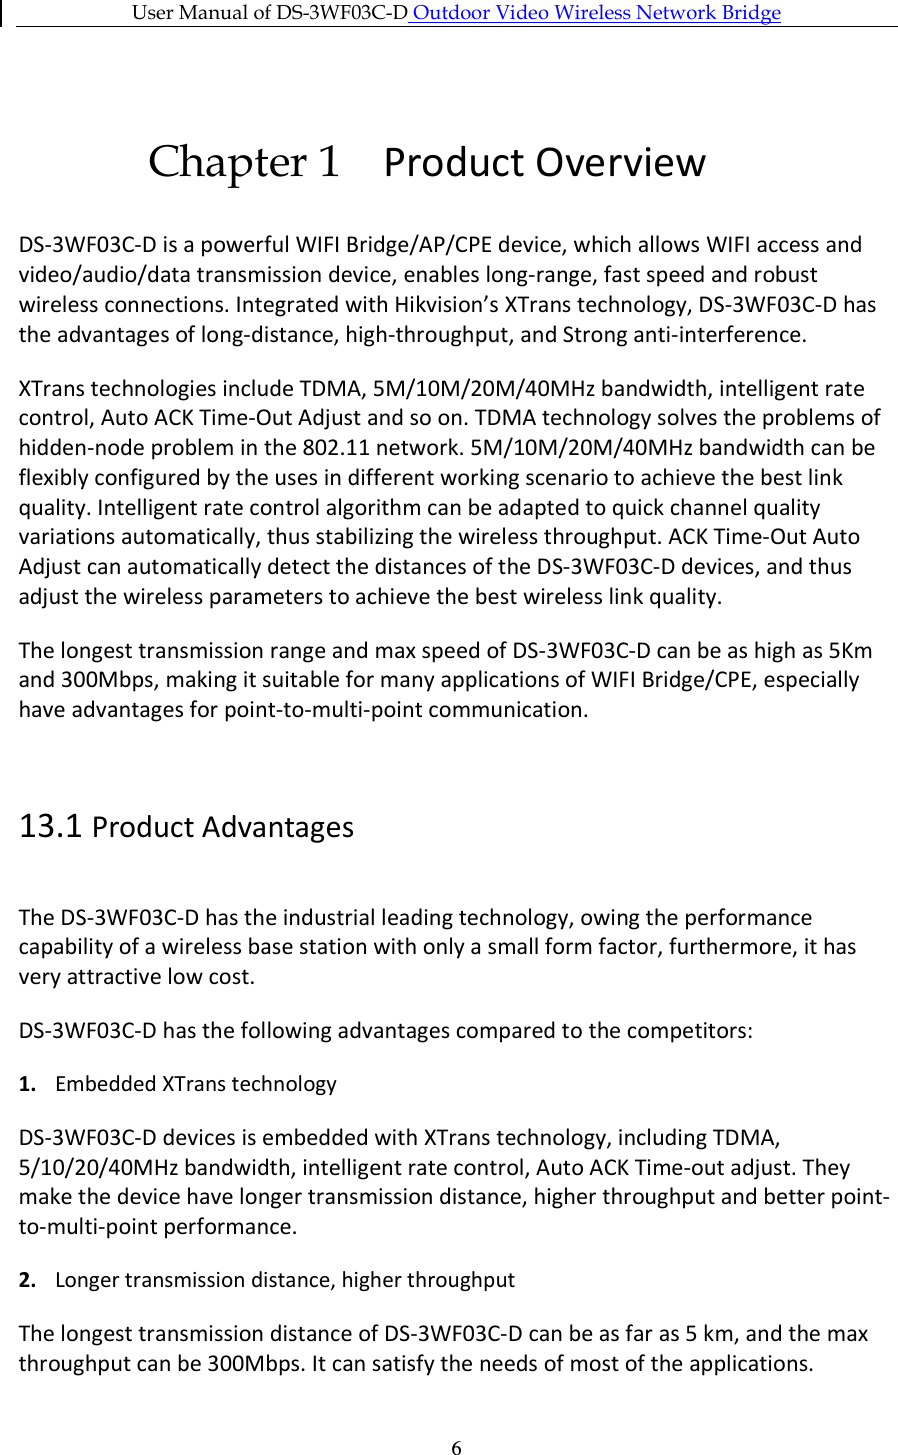 User Manual of DS-3WF03C-D Outdoor Video Wireless Network Bridge   6Chapter 1 Product Overview DS-3WF03C-D is a powerful WIFI Bridge/AP/CPE device, which allows WIFI access and video/audio/data transmission device, enables long-range, fast speed and robust wireless connections. Integrated with Hikvision’s XTrans technology, DS-3WF03C-D has the advantages of long-distance, high-throughput, and Strong anti-interference. XTrans technologies include TDMA, 5M/10M/20M/40MHz bandwidth, intelligent rate control, Auto ACK Time-Out Adjust and so on. TDMA technology solves the problems of hidden-node problem in the 802.11 network. 5M/10M/20M/40MHz bandwidth can be flexibly configured by the uses in different working scenario to achieve the best link quality. Intelligent rate control algorithm can be adapted to quick channel quality variations automatically, thus stabilizing the wireless throughput. ACK Time-Out Auto Adjust can automatically detect the distances of the DS-3WF03C-D devices, and thus adjust the wireless parameters to achieve the best wireless link quality. The longest transmission range and max speed of DS-3WF03C-D can be as high as 5Km and 300Mbps, making it suitable for many applications of WIFI Bridge/CPE, especially have advantages for point-to-multi-point communication.  13.1 Product Advantages The DS-3WF03C-D has the industrial leading technology, owing the performance capability of a wireless base station with only a small form factor, furthermore, it has very attractive low cost. DS-3WF03C-D has the following advantages compared to the competitors: 1. Embedded XTrans technology DS-3WF03C-D devices is embedded with XTrans technology, including TDMA, 5/10/20/40MHz bandwidth, intelligent rate control, Auto ACK Time-out adjust. They make the device have longer transmission distance, higher throughput and better point-to-multi-point performance. 2. Longer transmission distance, higher throughput The longest transmission distance of DS-3WF03C-D can be as far as 5 km, and the max throughput can be 300Mbps. It can satisfy the needs of most of the applications. 